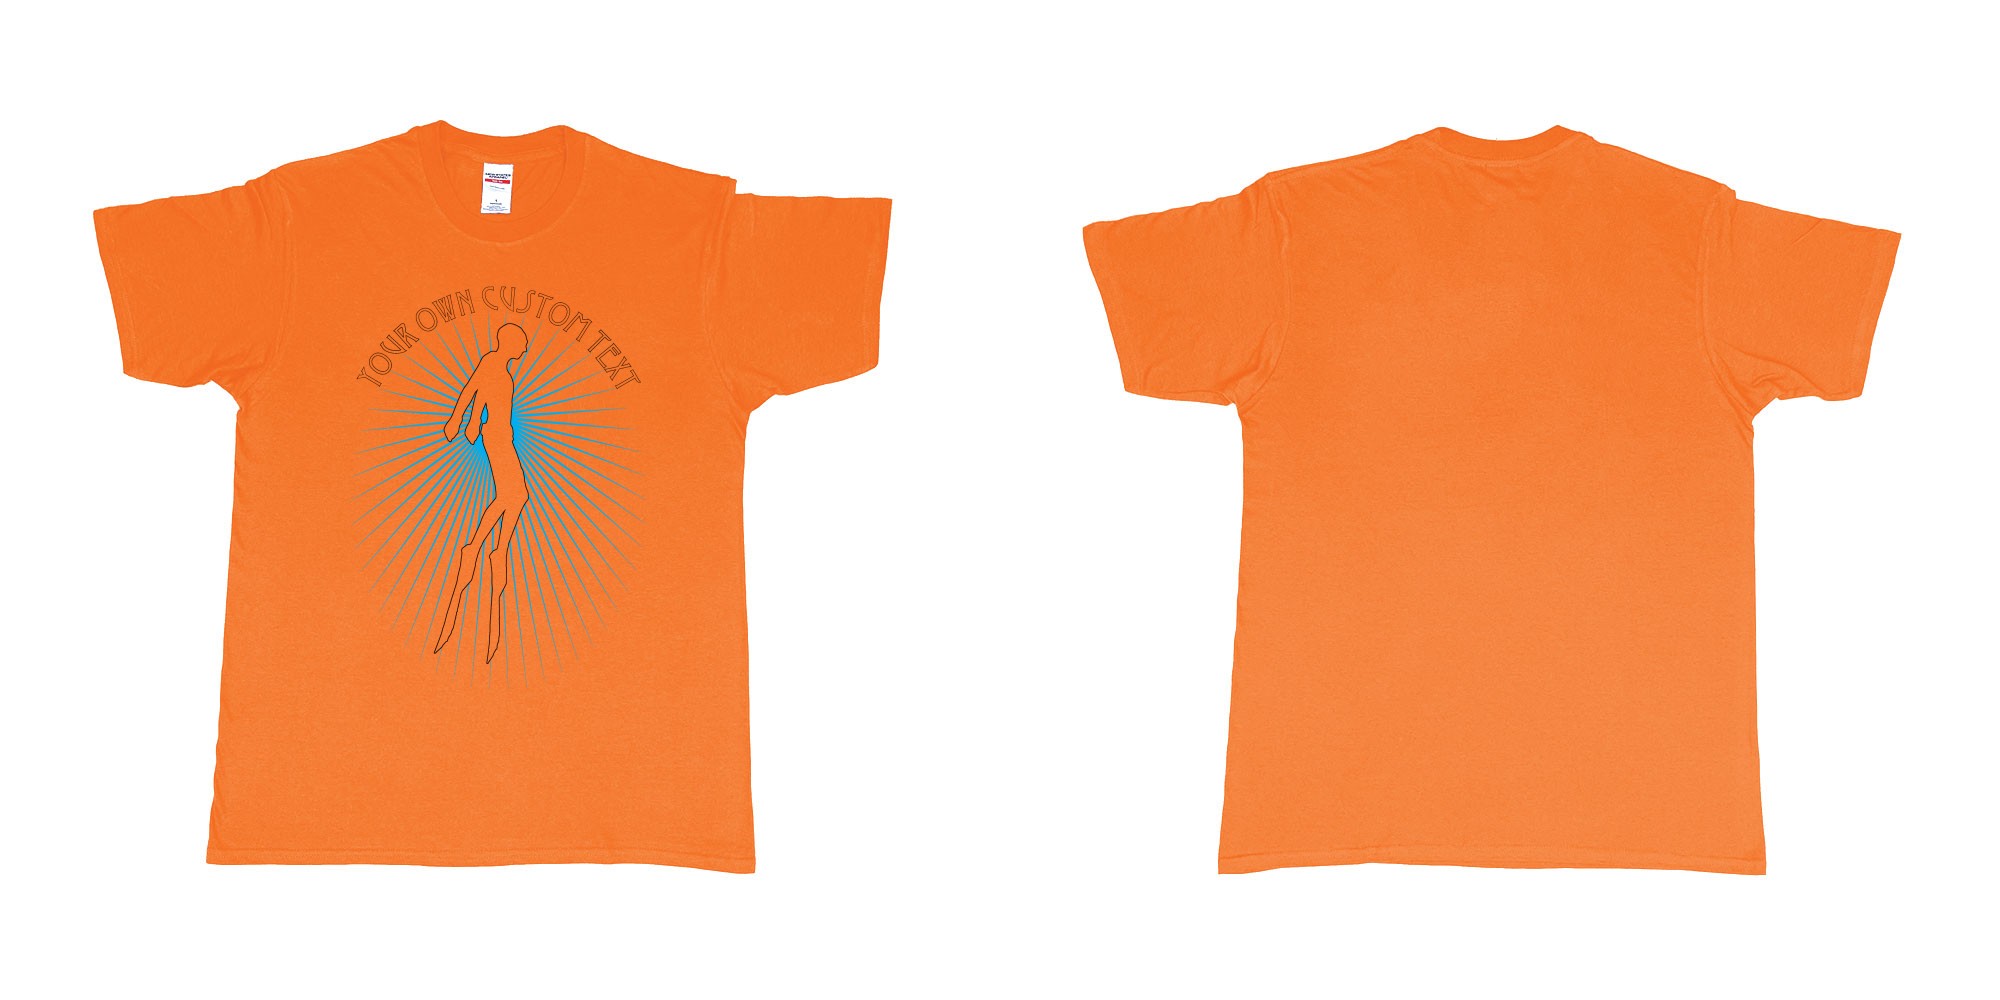 Custom tshirt design freediver swimming sun rays in fabric color orange choice your own text made in Bali by The Pirate Way